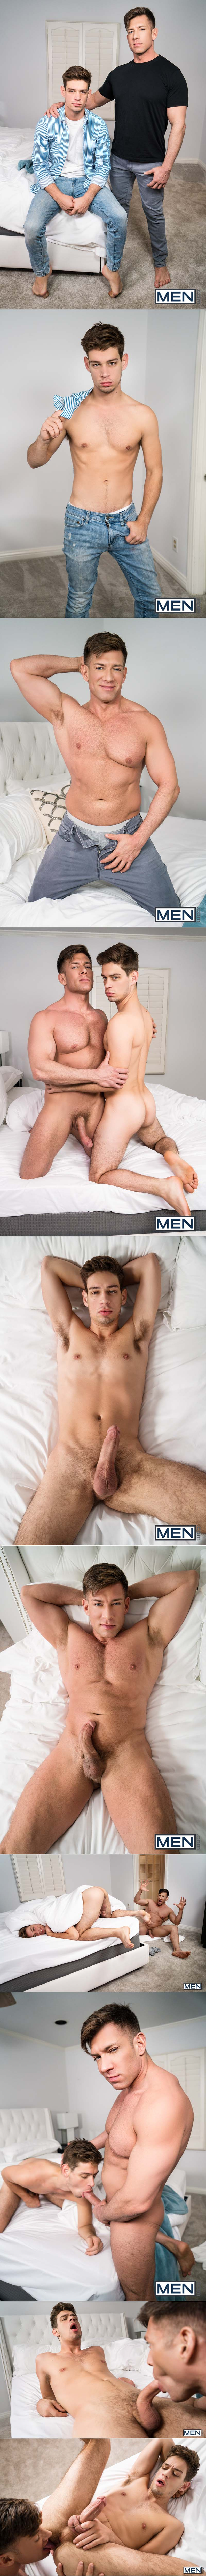 Get Your Dick Outta My Son, Part One (Bruce Beckham Fucks Michael DelRay) at MEN.com